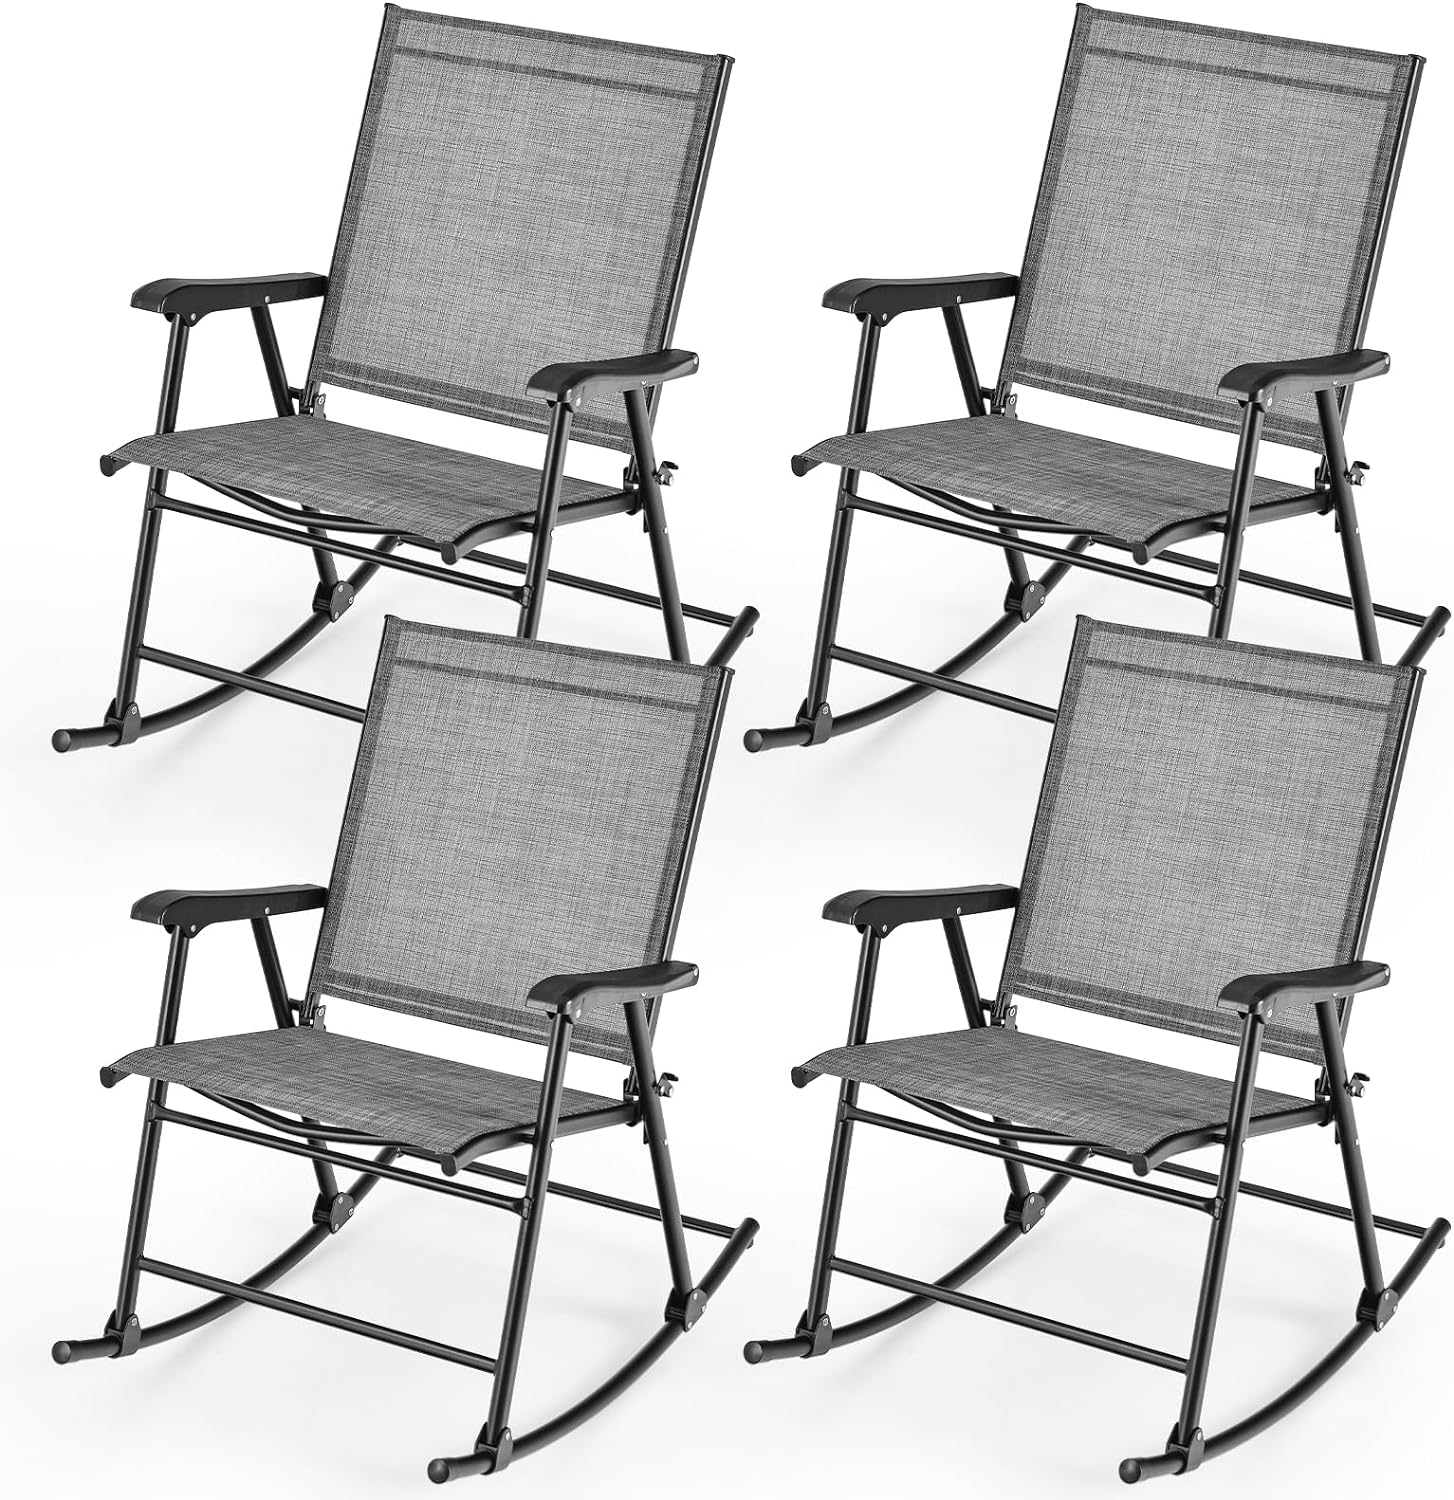 Giantex Folding Rocking Chairs Set of 2 - High Back Patio Rocking Chairs w/Armrests and Footrests, Breathable Back Rest